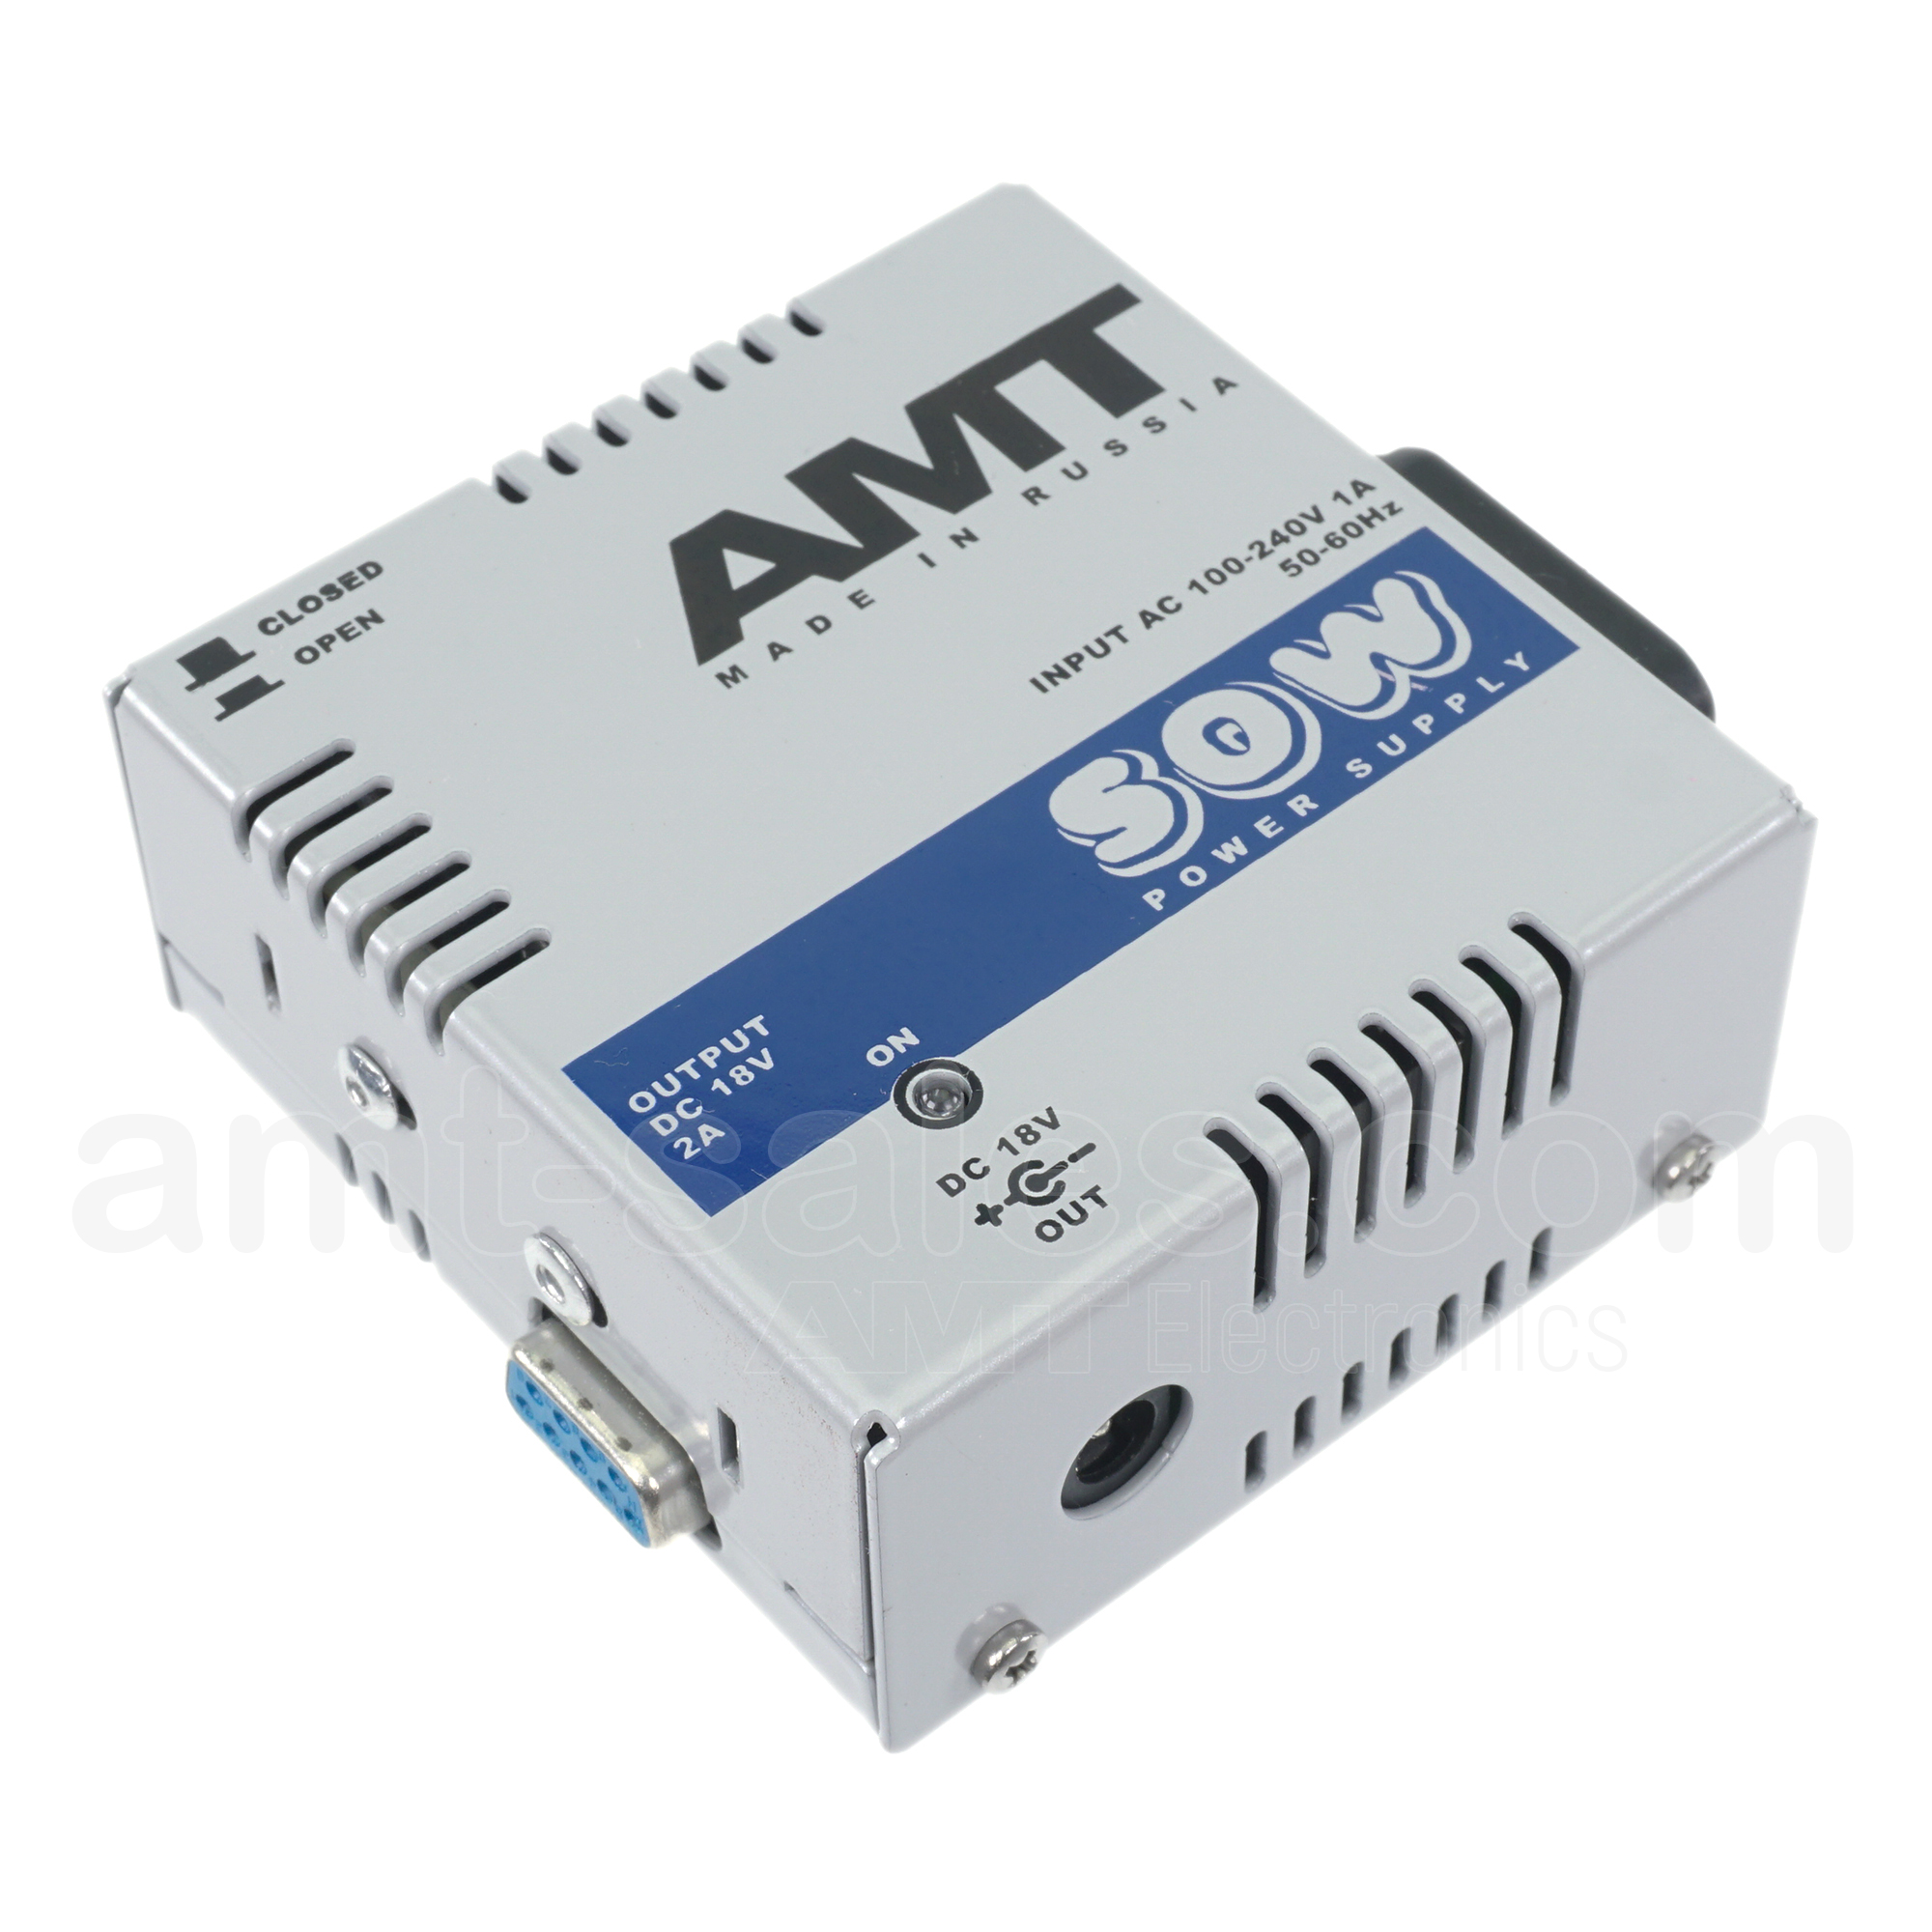 AMT SOW PS ACDC-18V - primary power module